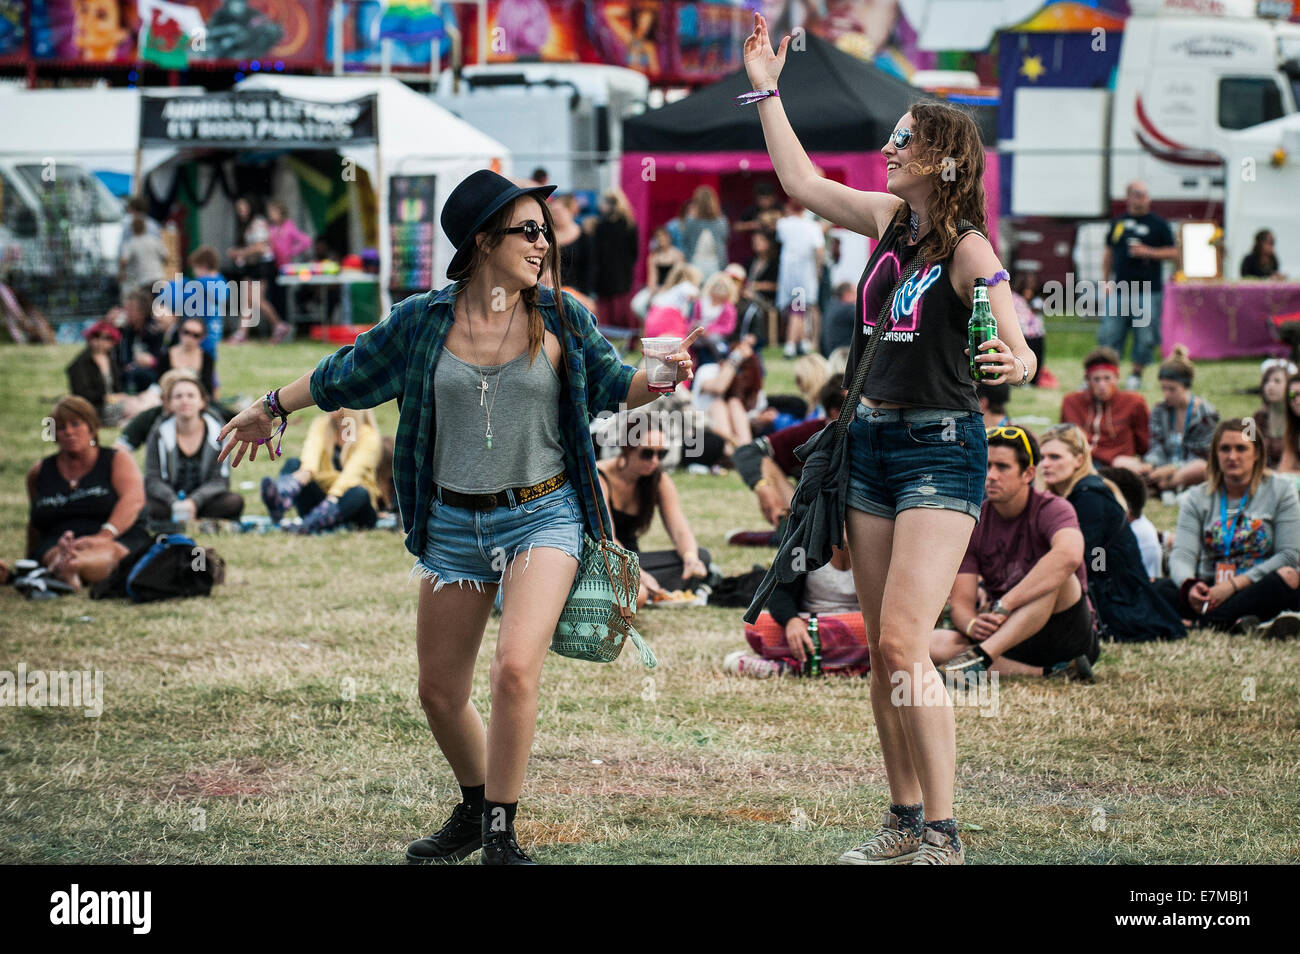 Festivalgoers enjoying themselves at the Brownstock Festival in Essex. Stock Photo